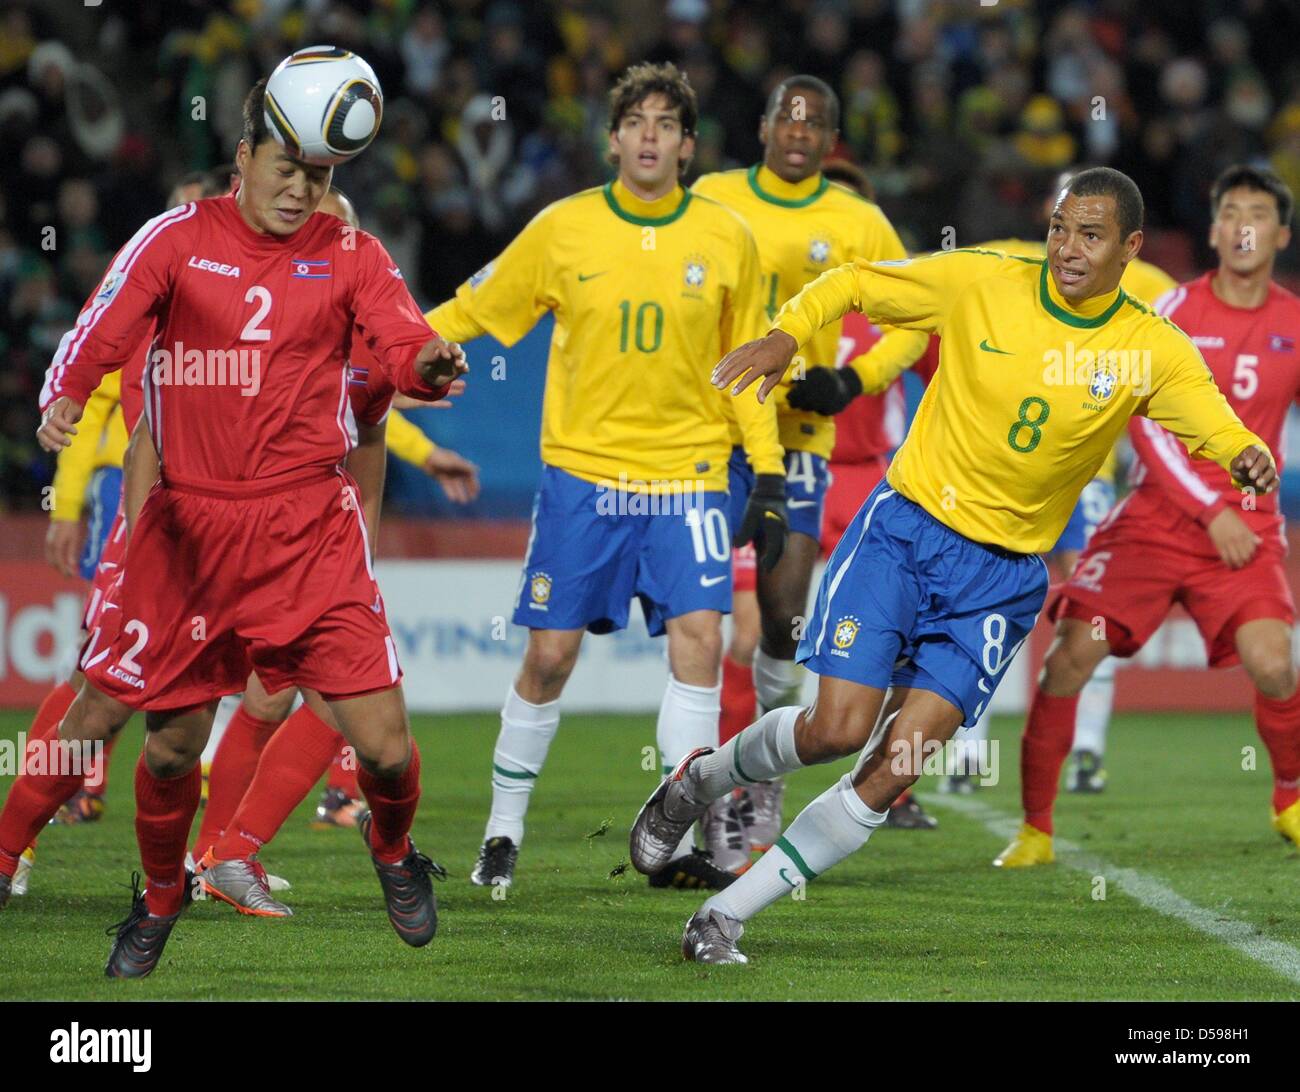 Gilberto Silva (R) of Brazil vies with Cha Jong-Hyok (L) of North Korea during the FIFA World Cup 2010 group G match between Brazil and North Korea at Ellis Park Stadium in Johannesburg, South Africa 15 June 2010. Photo: Ronald Wittek dpa - Please refer to http://dpaq.de/FIFA-WM2010-TC  +++(c) dpa - Bildfunk+++ Stock Photo